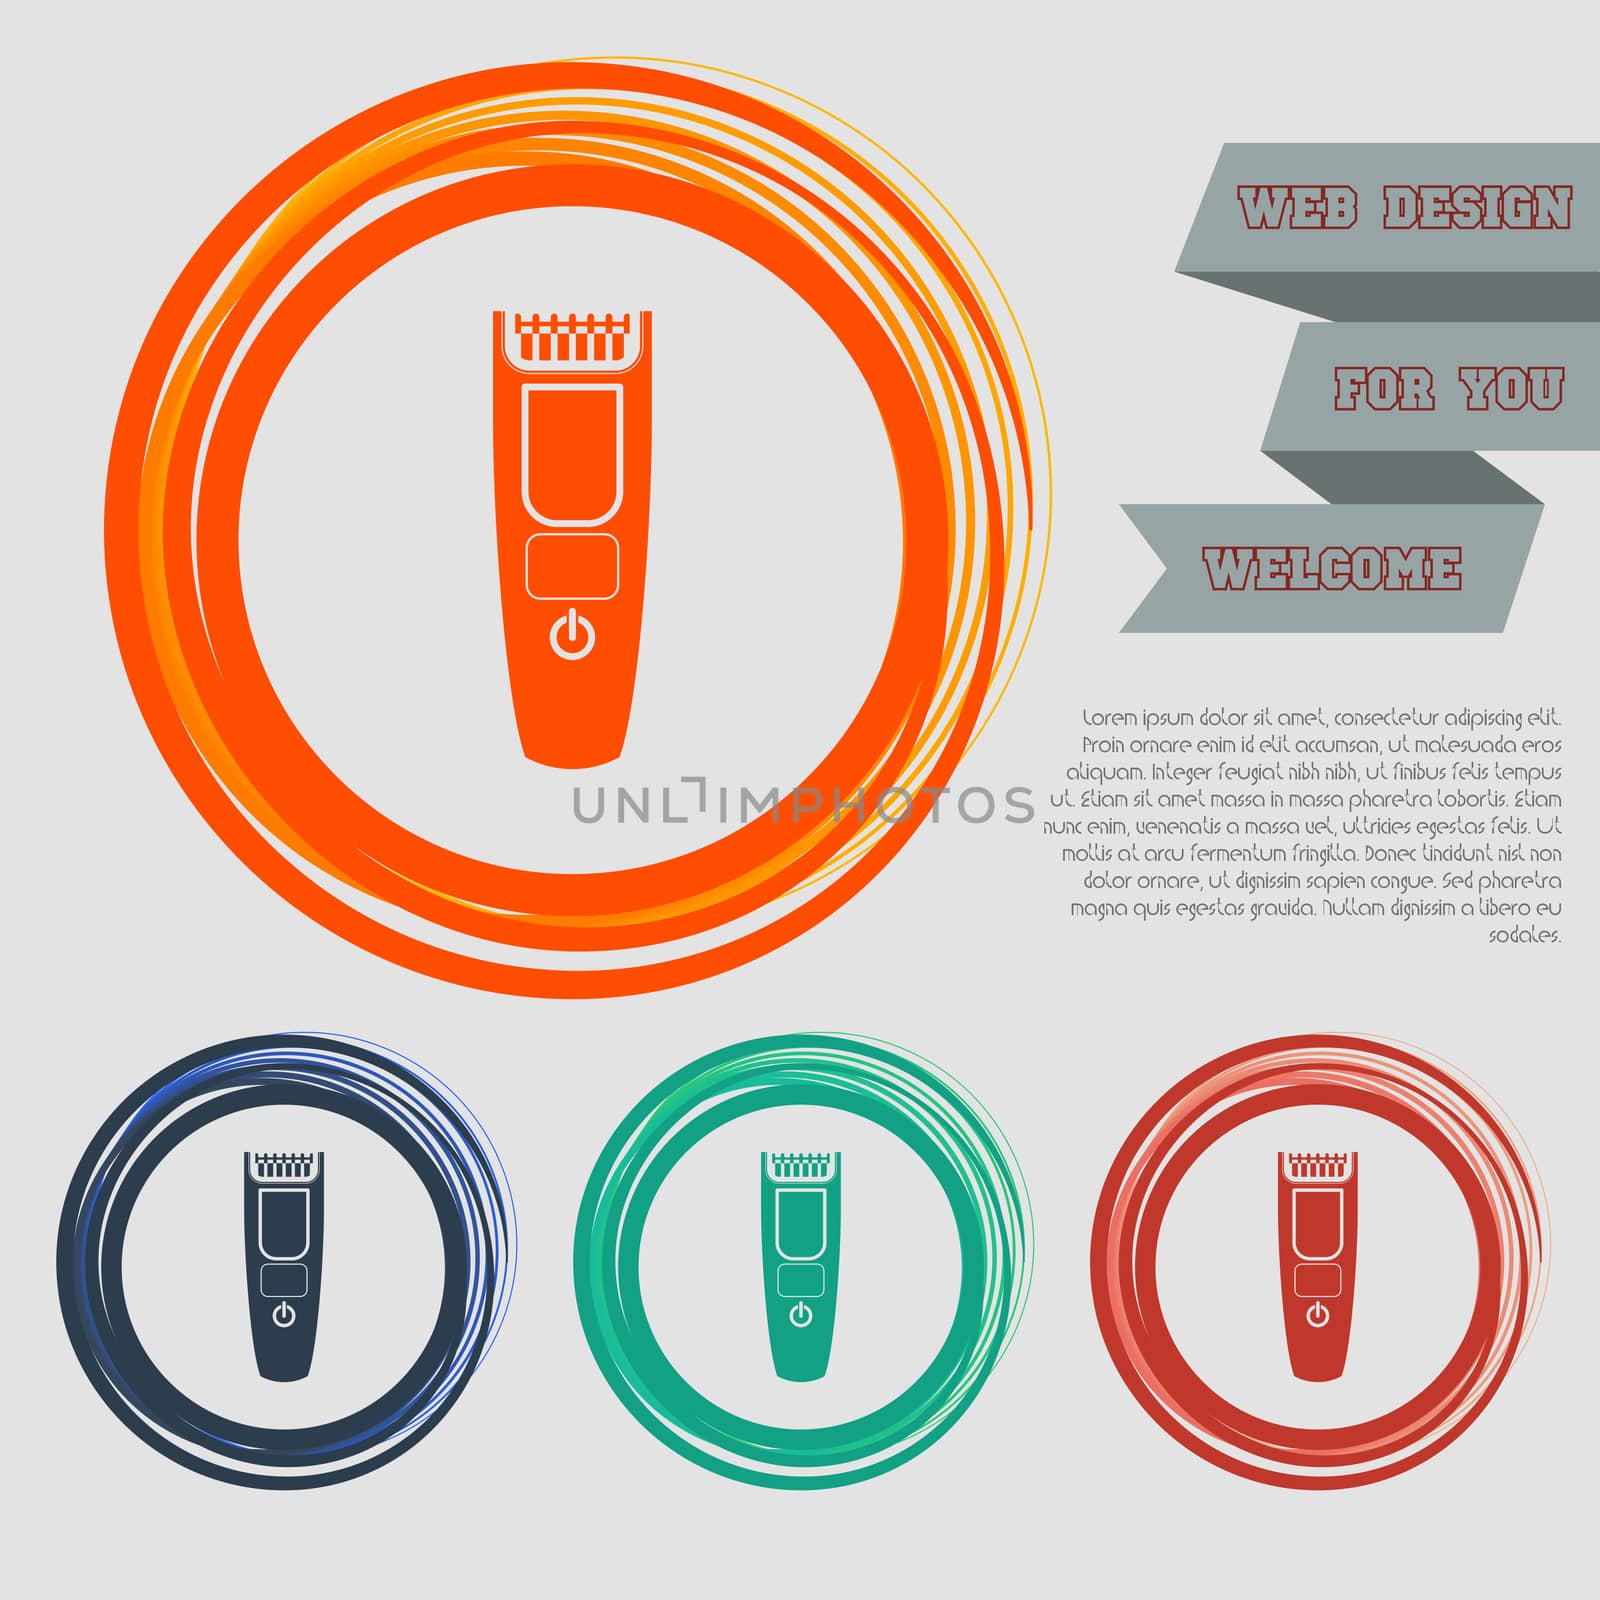 Shaver hairclipper icon on the red, blue, green, orange buttons for your website and design with space text. illustration